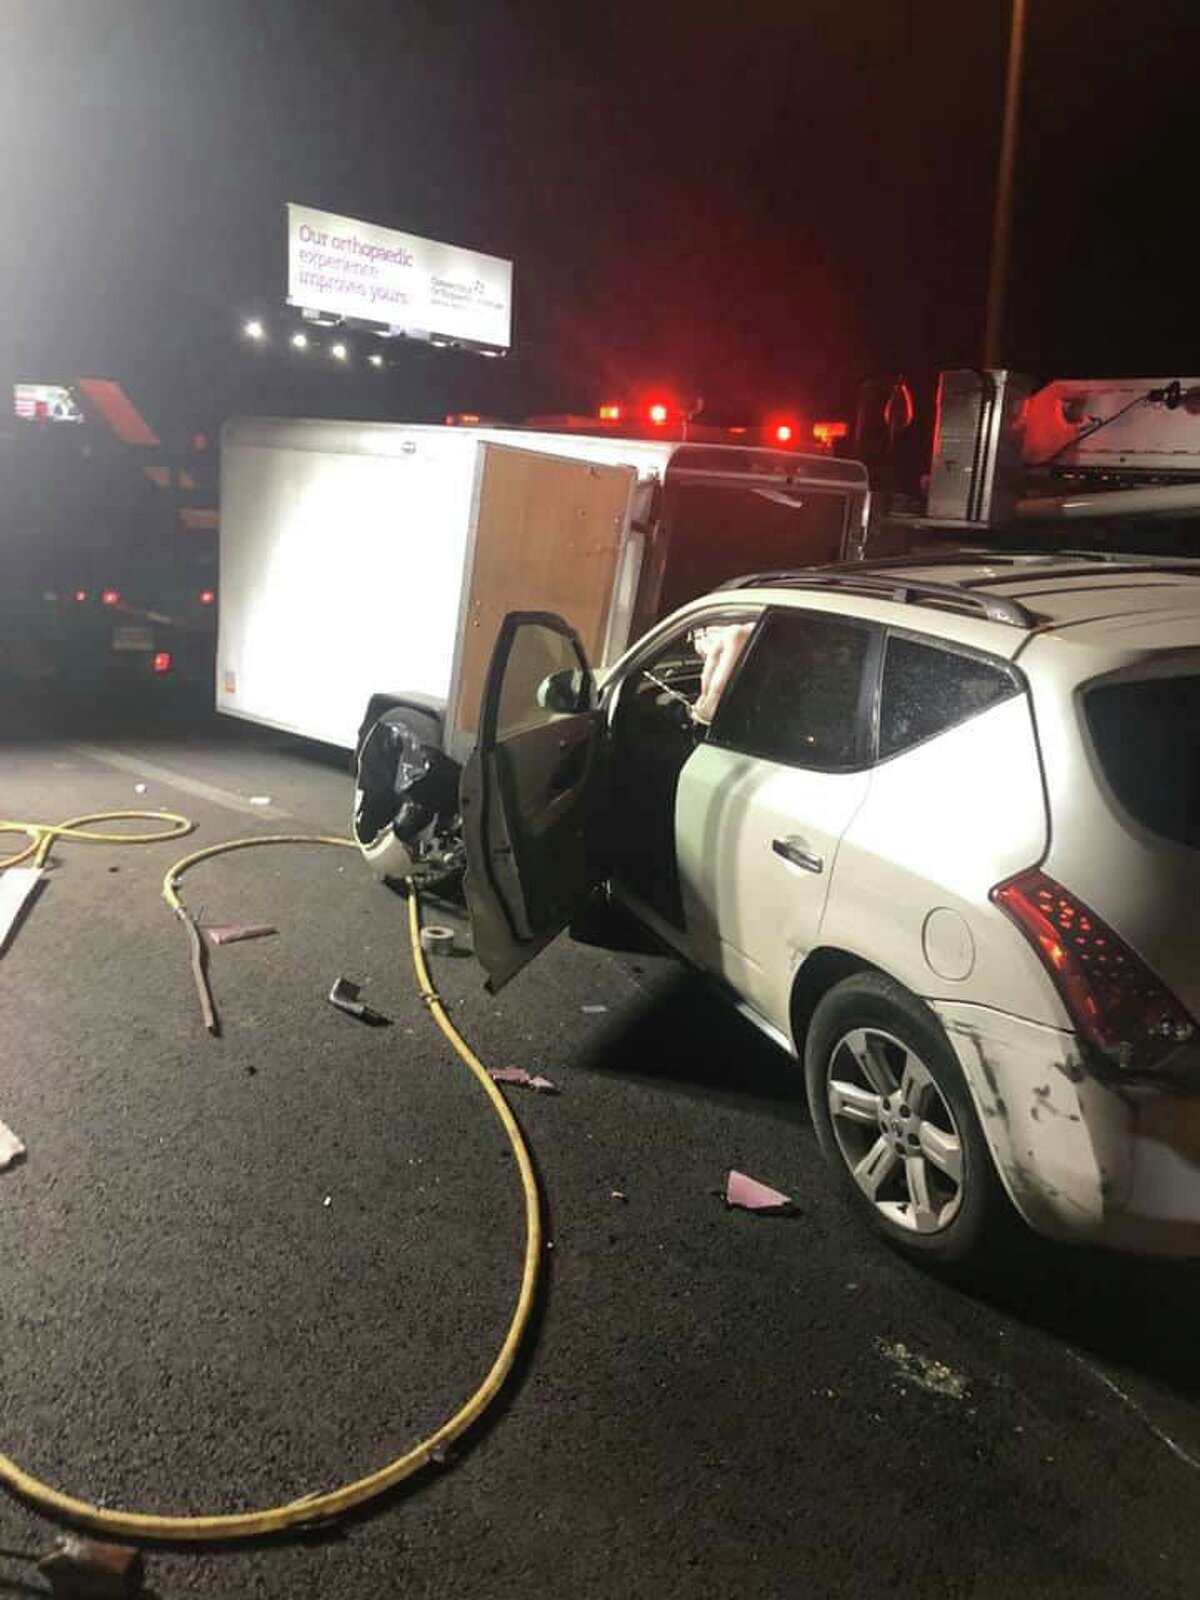 Minutes before 10 p.m. May 5, 2020, troopers from the Connecticut State Police Troop G barracks responded to a reported crash “within the highway construction project” just past Exit 43 in West Haven, Conn., state police said Wednesday.